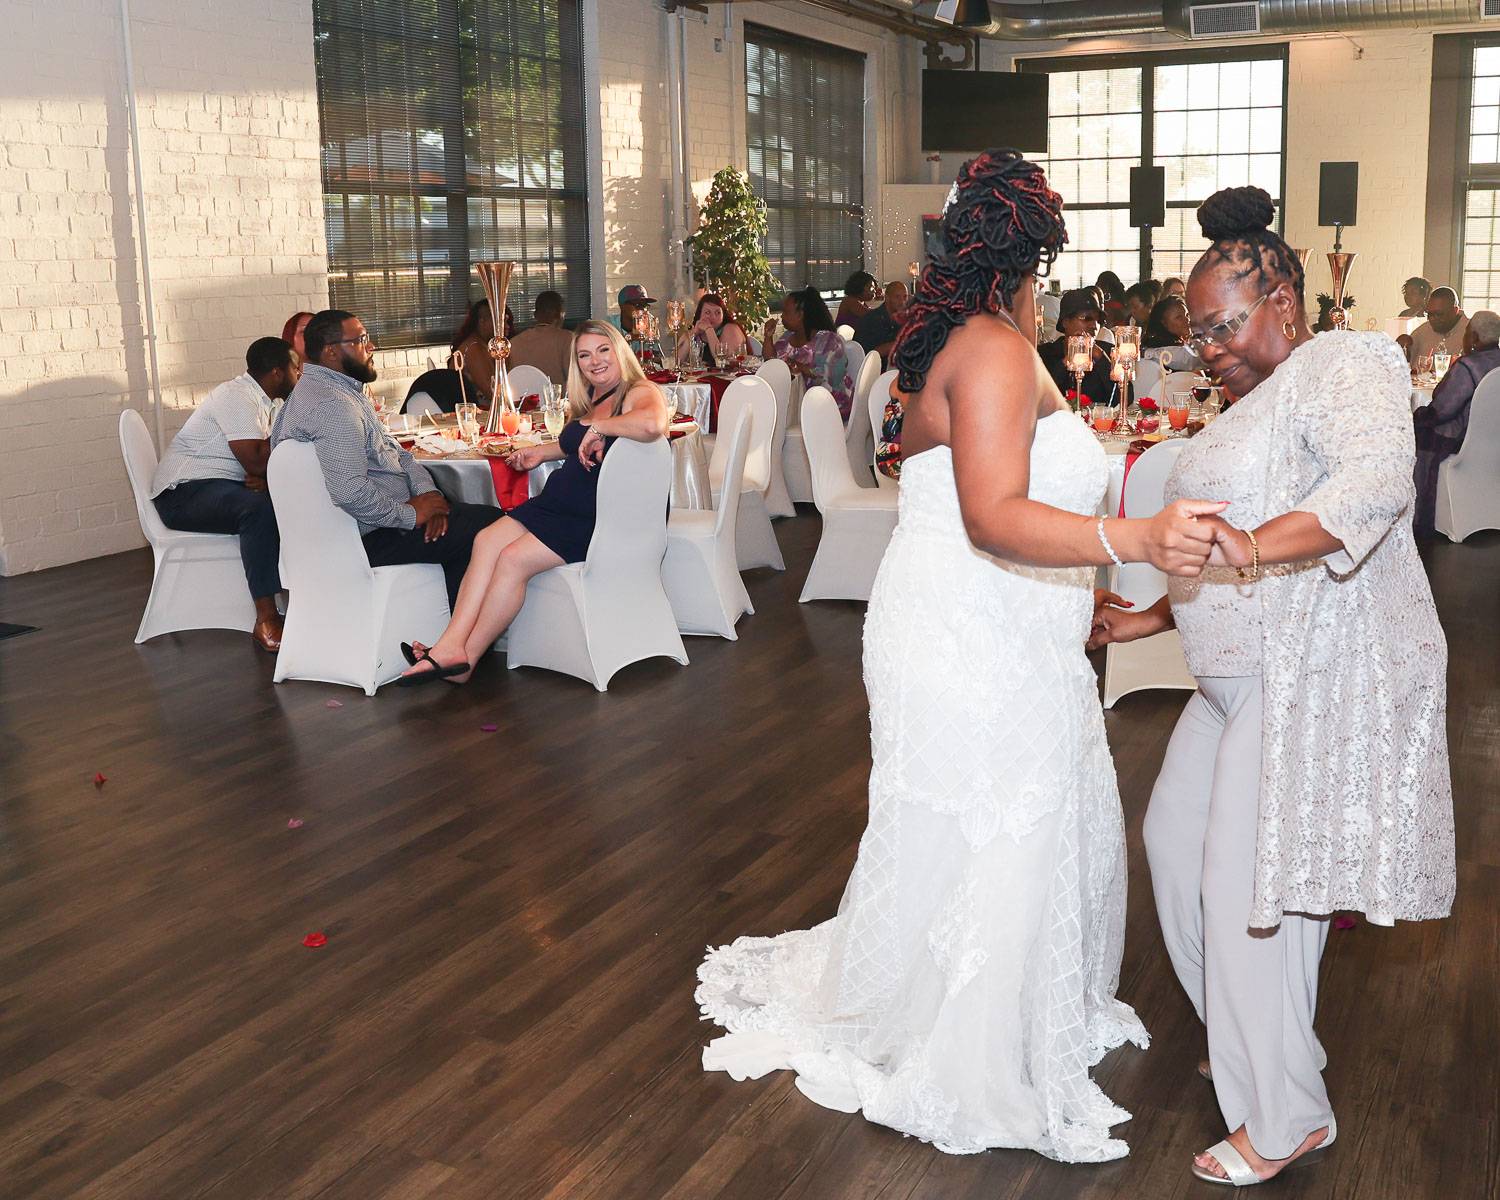 The bride dancing while holding hands with her mother-in-law